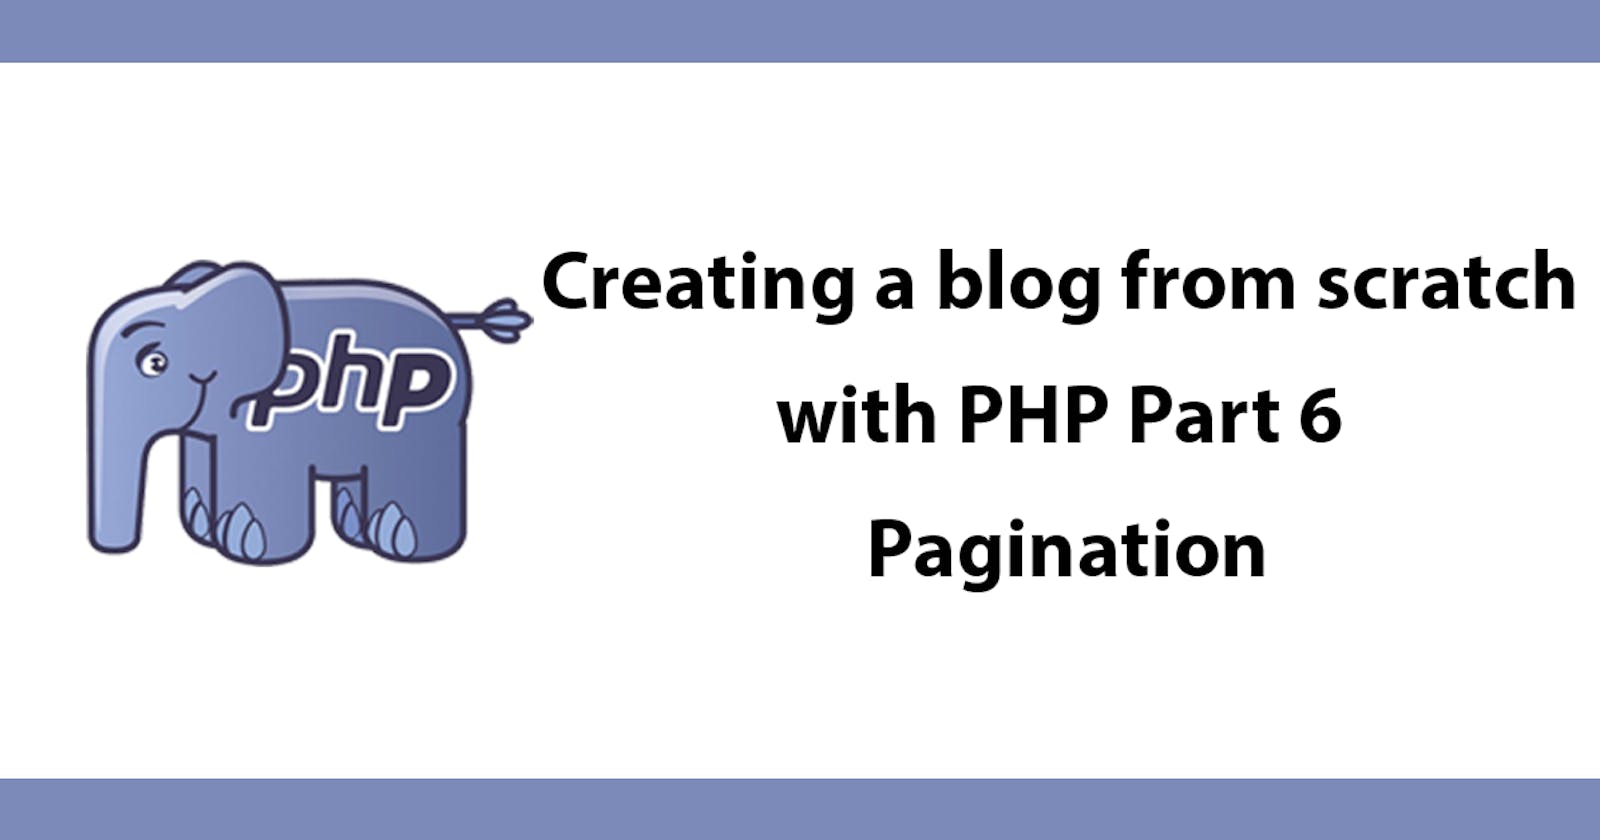 Creating a blog from scratch with PHP - Part 6 Pagination